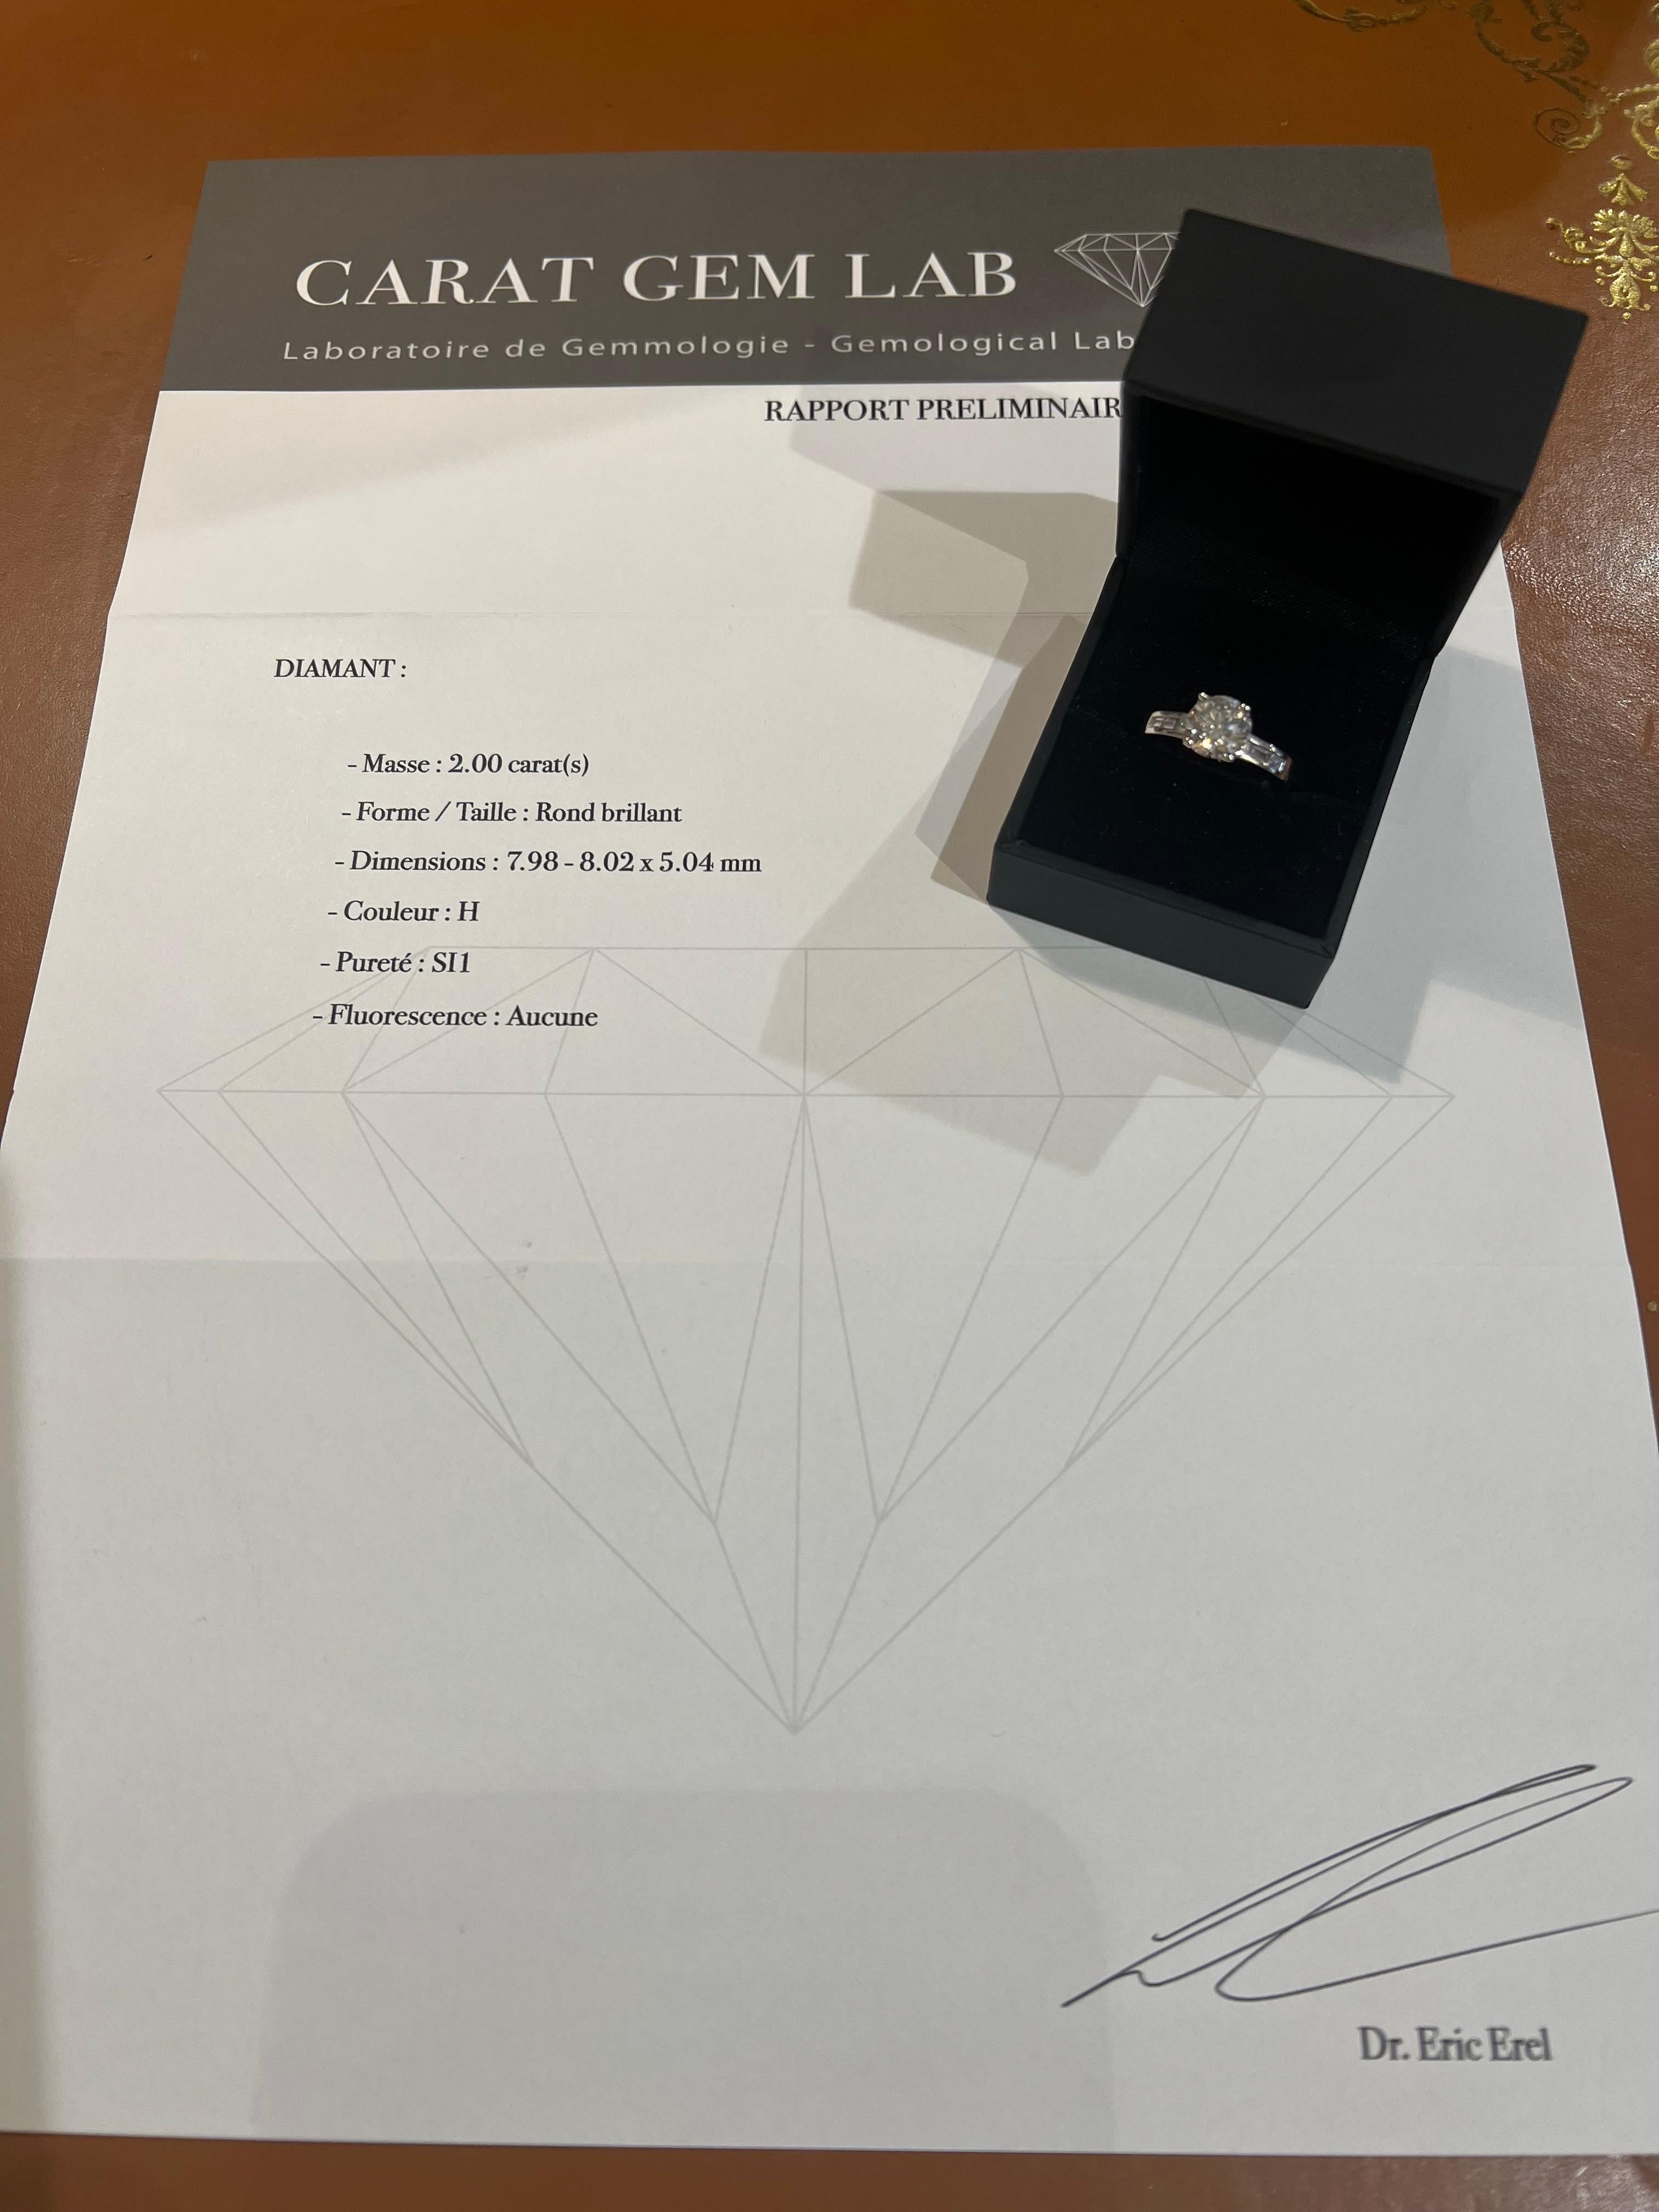 Exceptional solitaire presenting in its middle a brilliant diamond of 2 carats supported by six baguette diamonds. 

Ideal gift for an engagement ring.

Weight of the center diamond : 2 carats

With Carat Gem Lab certificate, specifying H color, SI1